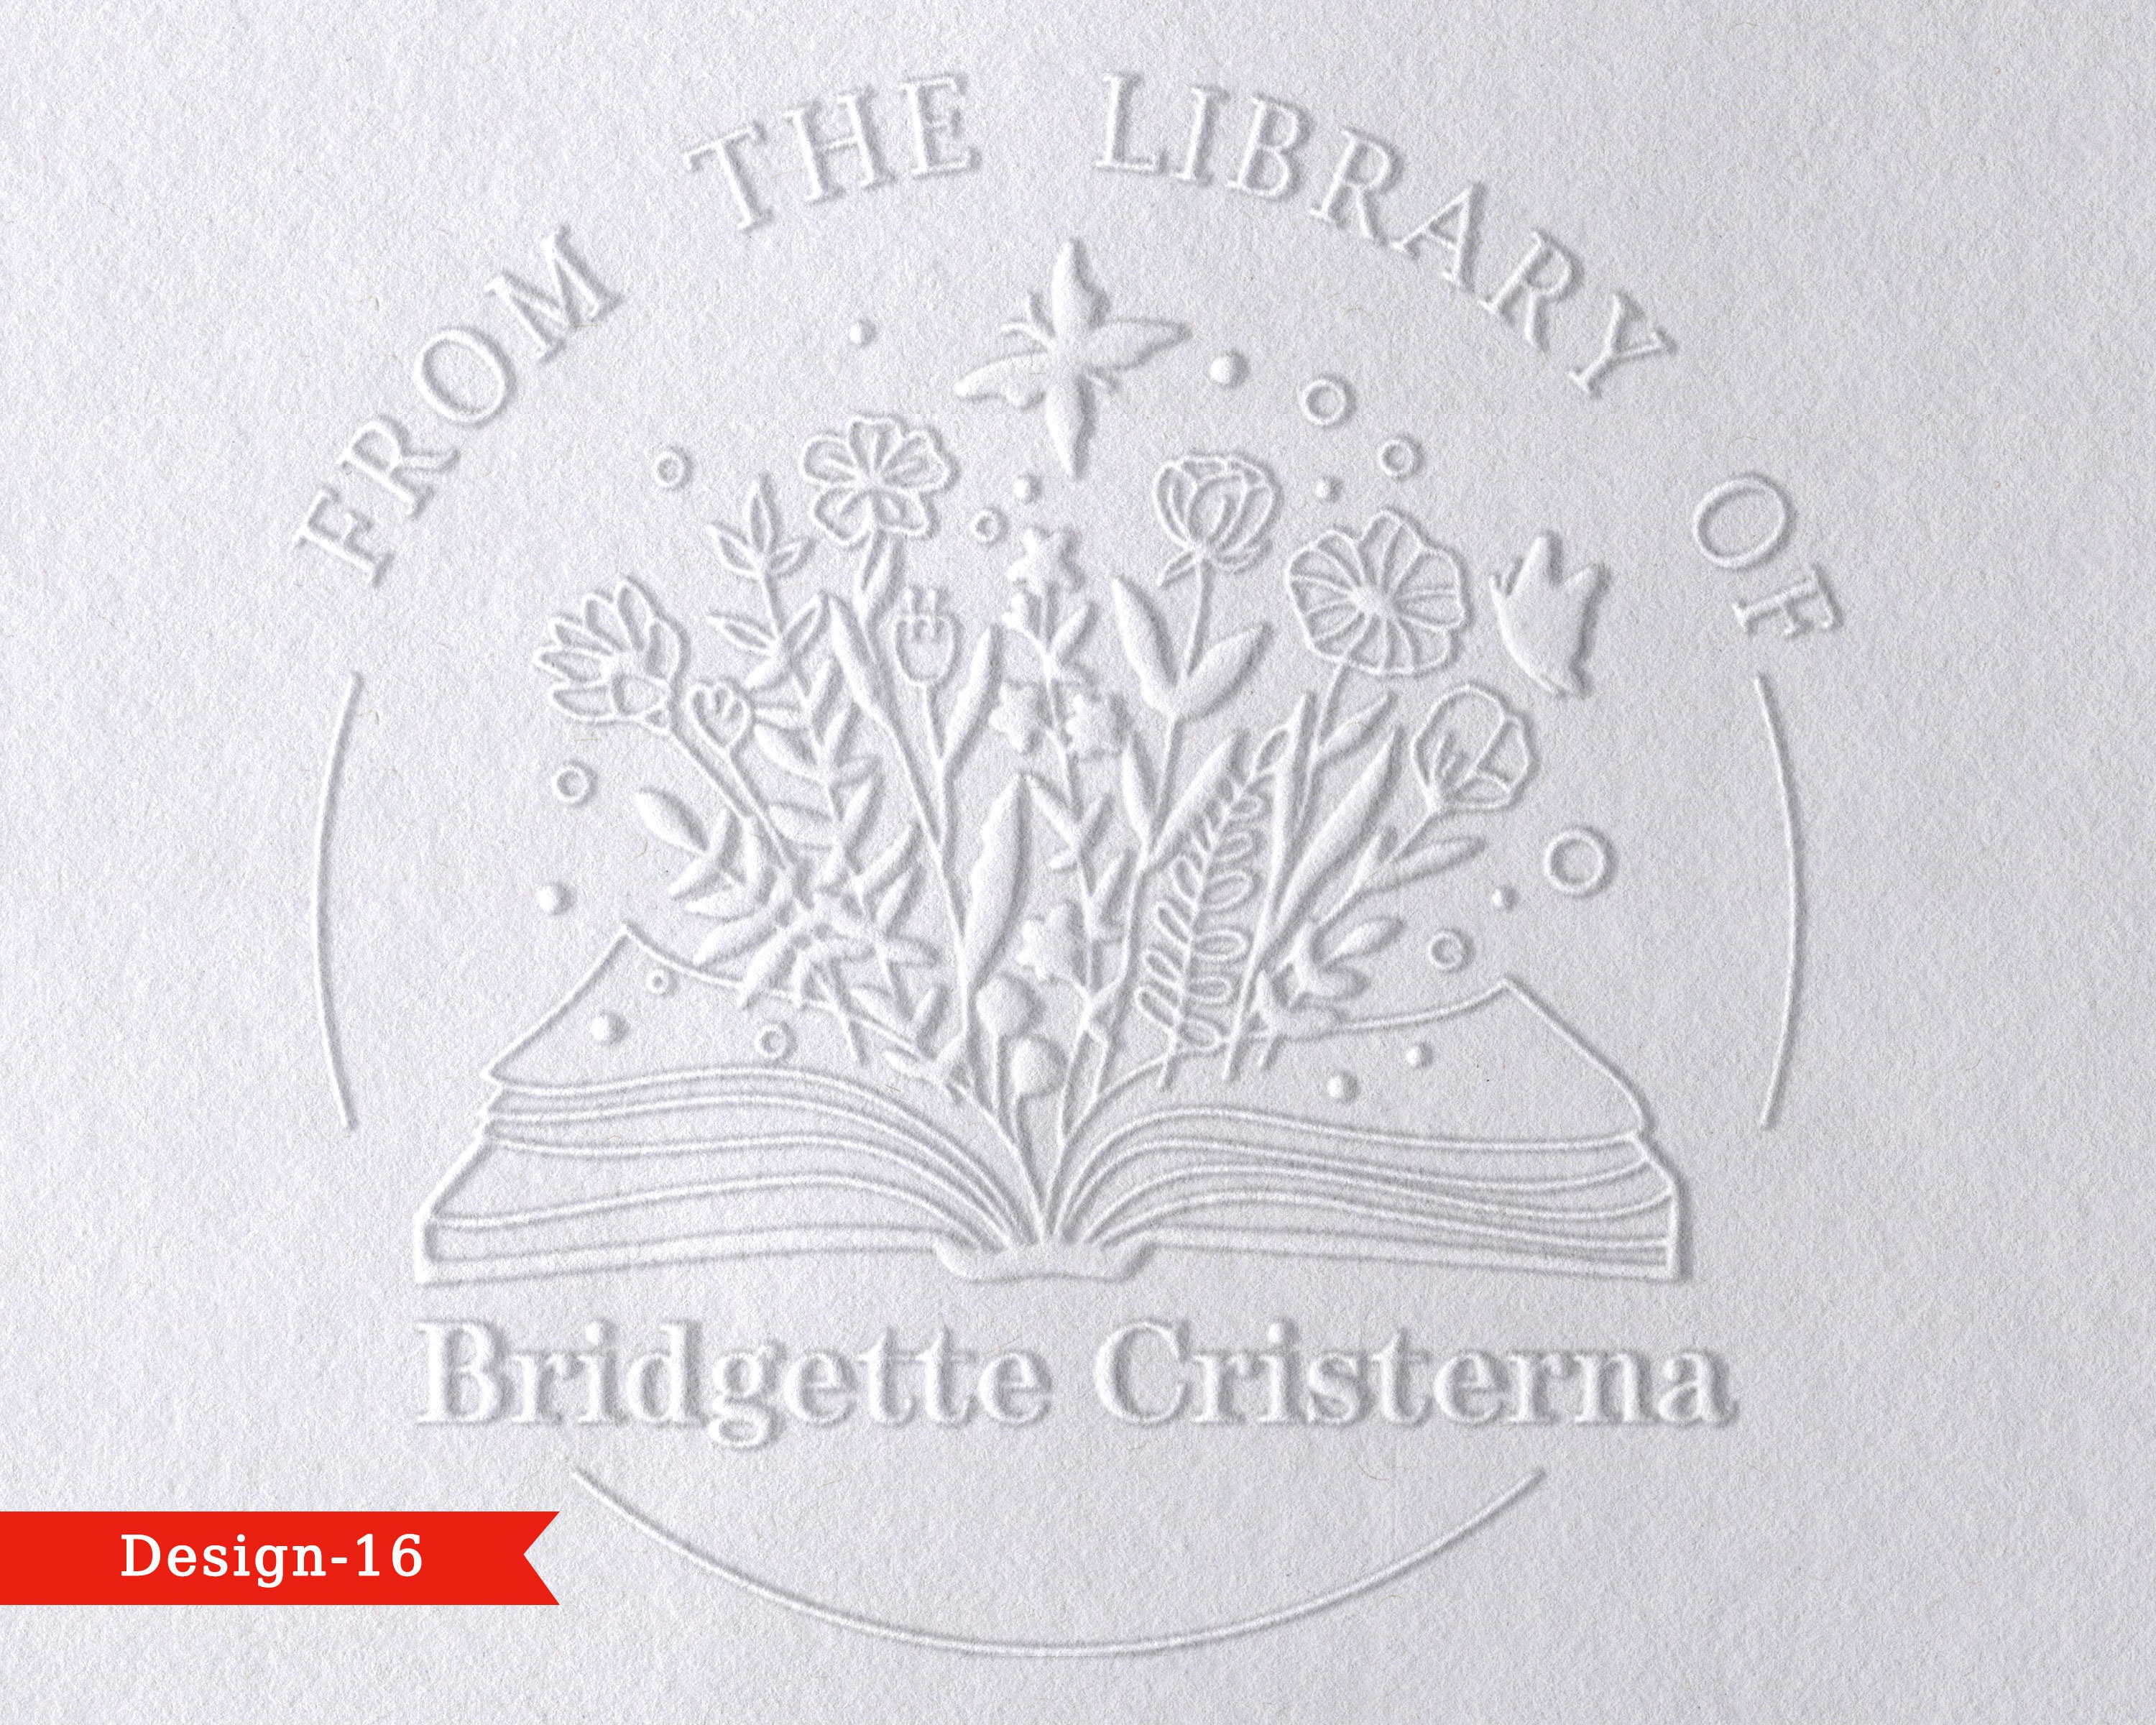 Book Embosser Personalized From the Library of Stamp Rubber Stamp